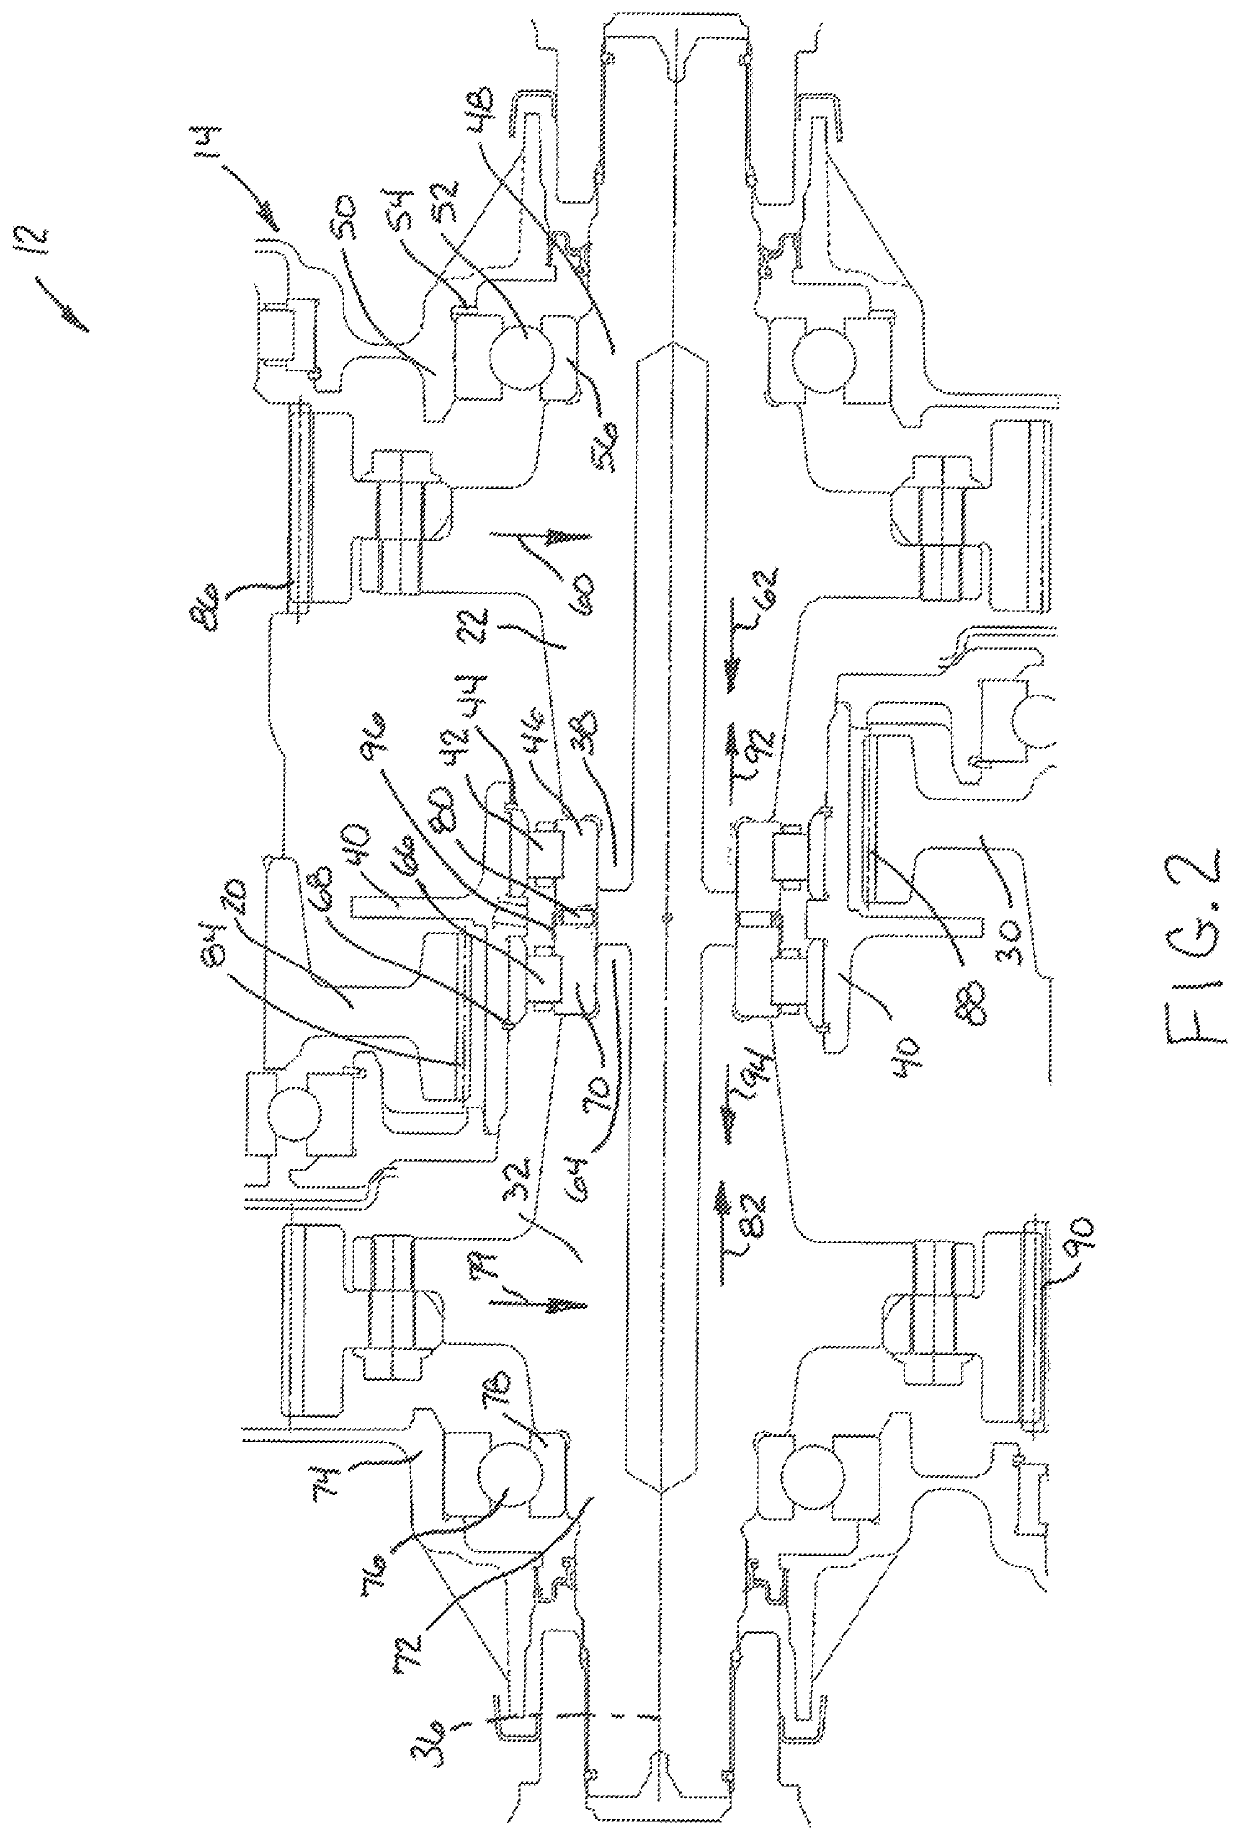 Bearing and shaft arrangement for electric drive unit